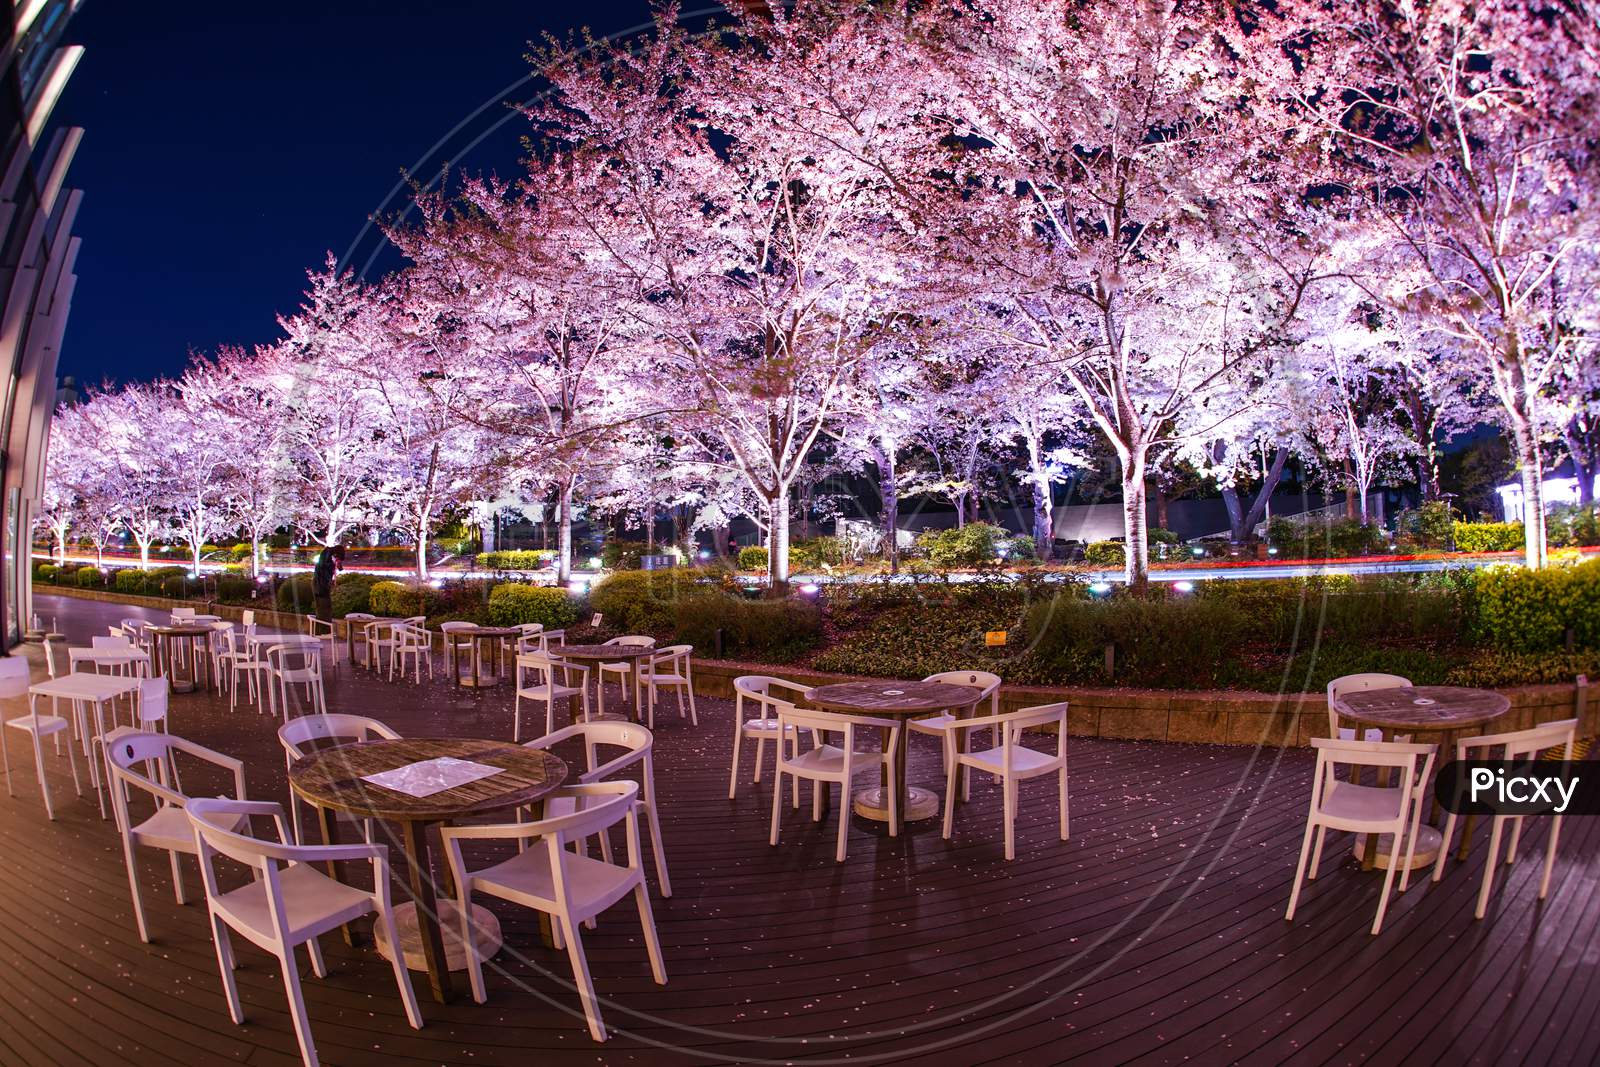 Cherry Blossoms And Benches In Full Bloom